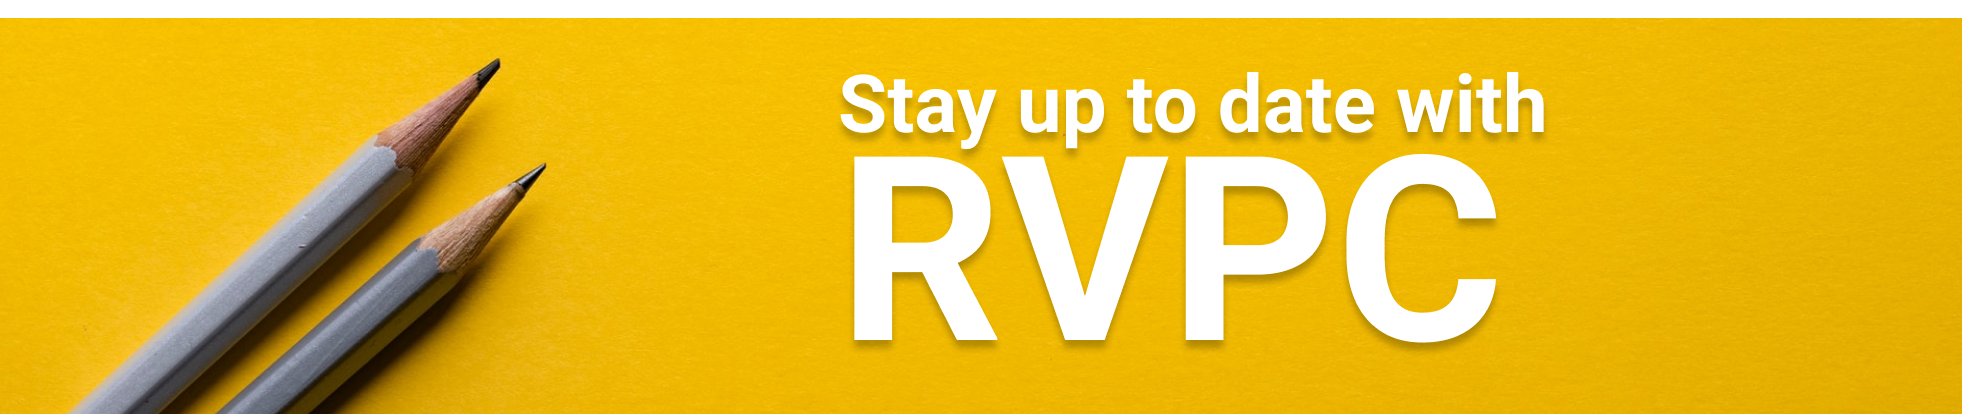 Stay up to date with RVPC Banner